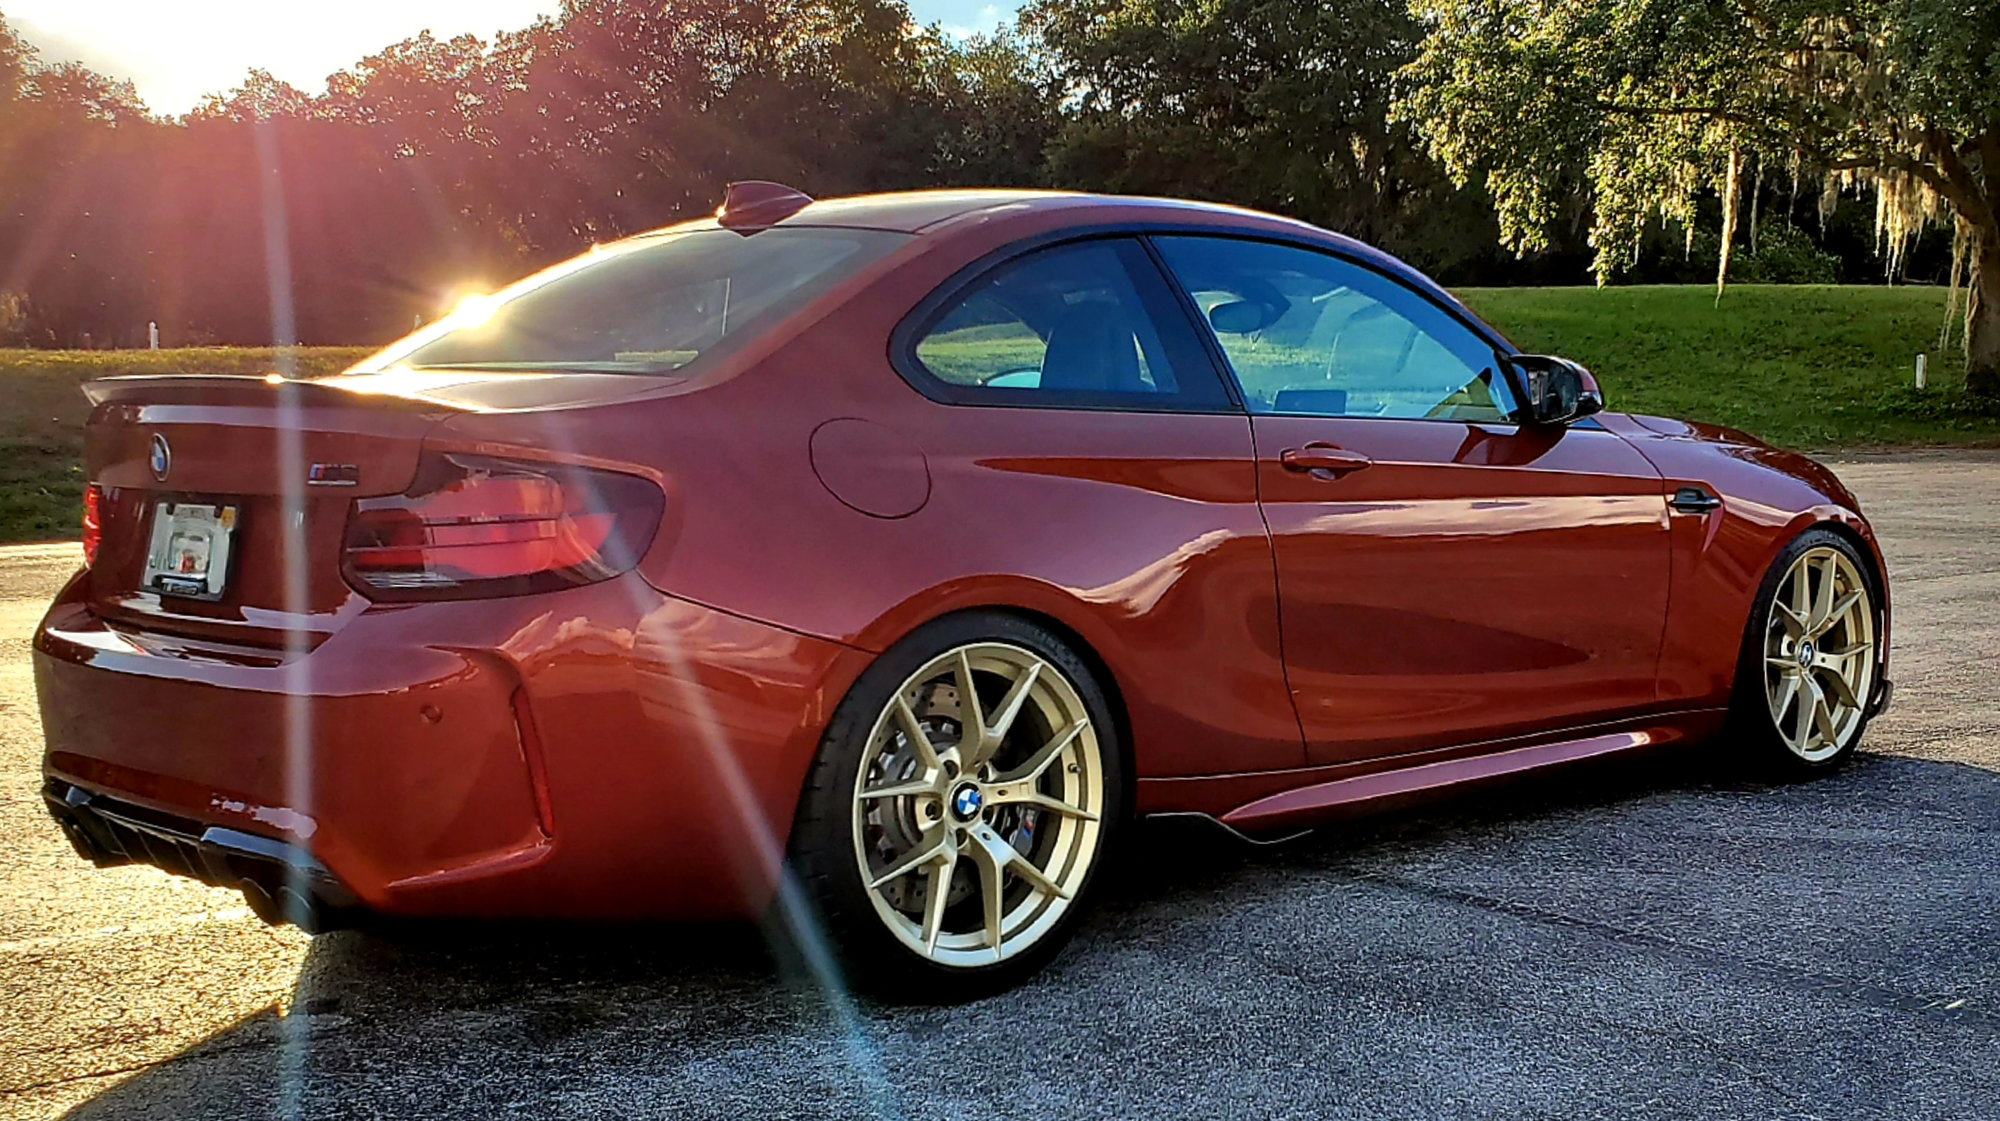 2020 BMW M2 - 2020 M2 Competition Sunset Orange M-DCT - Used - VIN WBS2U7C06L7E78724 - 8,950 Miles - 6 cyl - 2WD - Automatic - Coupe - Orange - Dade City, FL 33525, United States